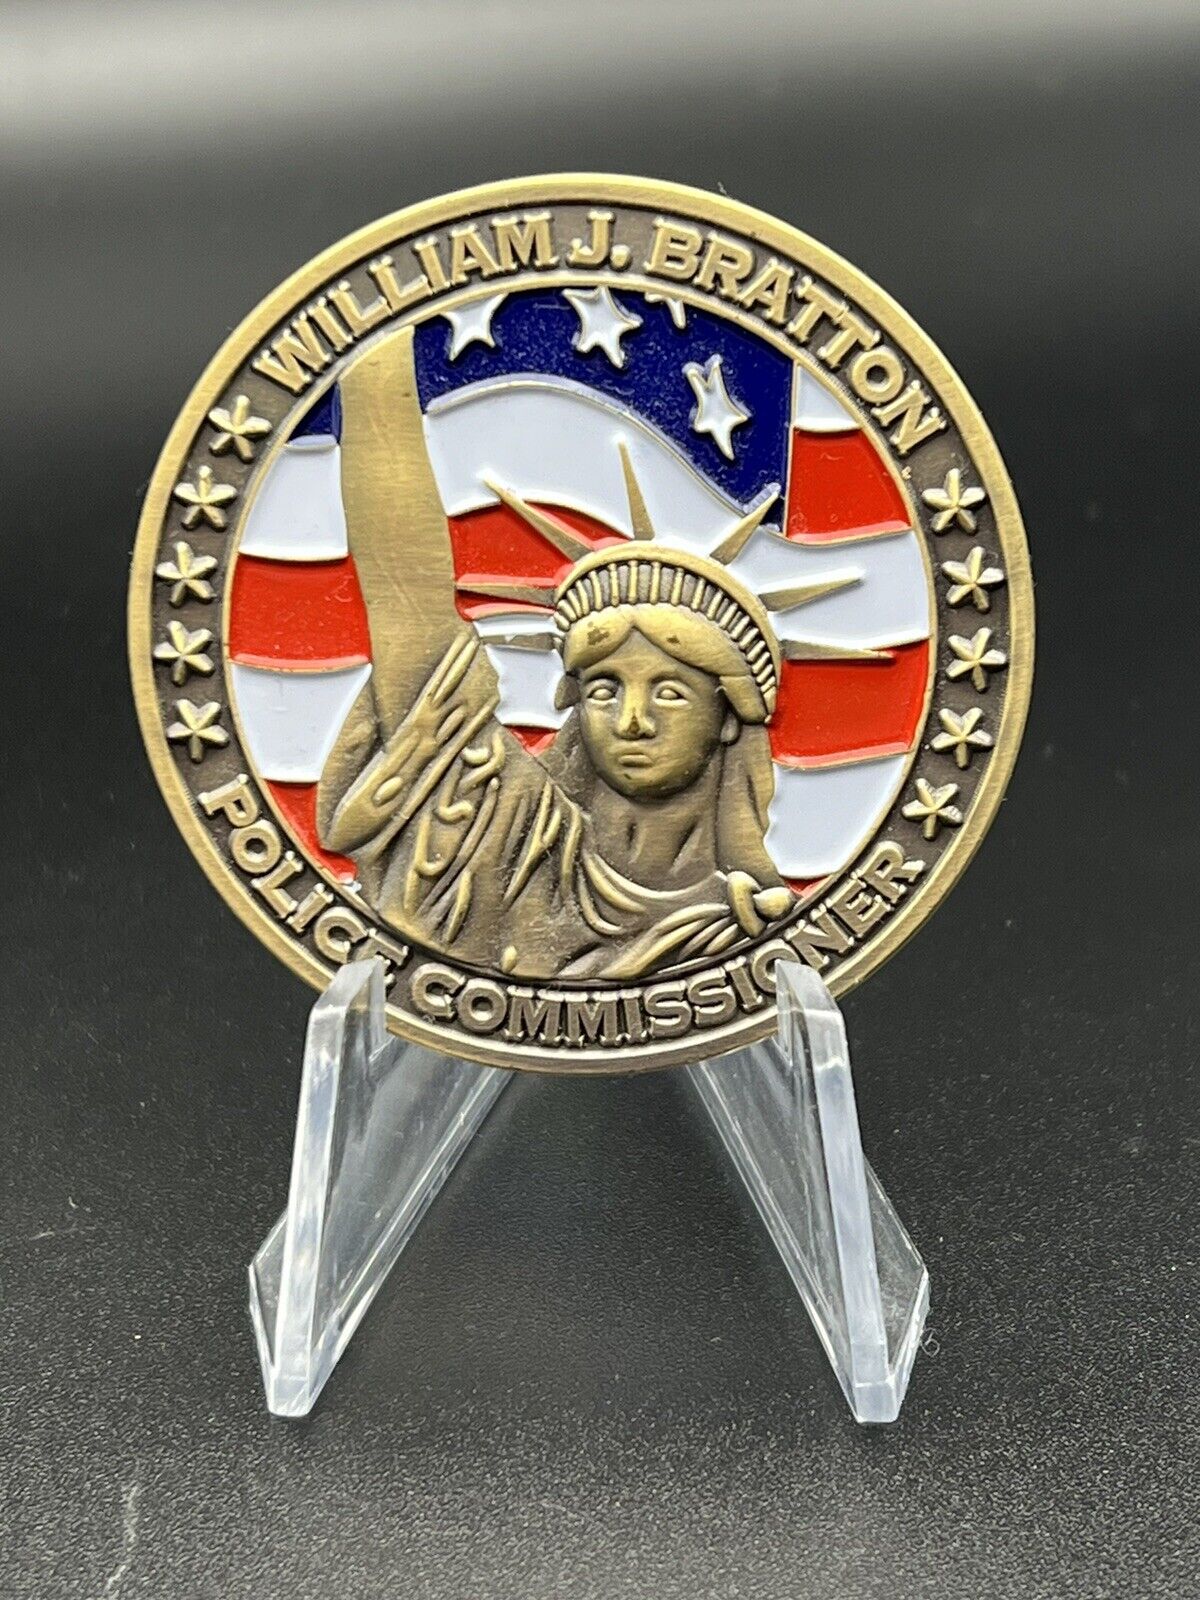 nypd challenge coin Commissioner Bratton 2015 Women’s Conference